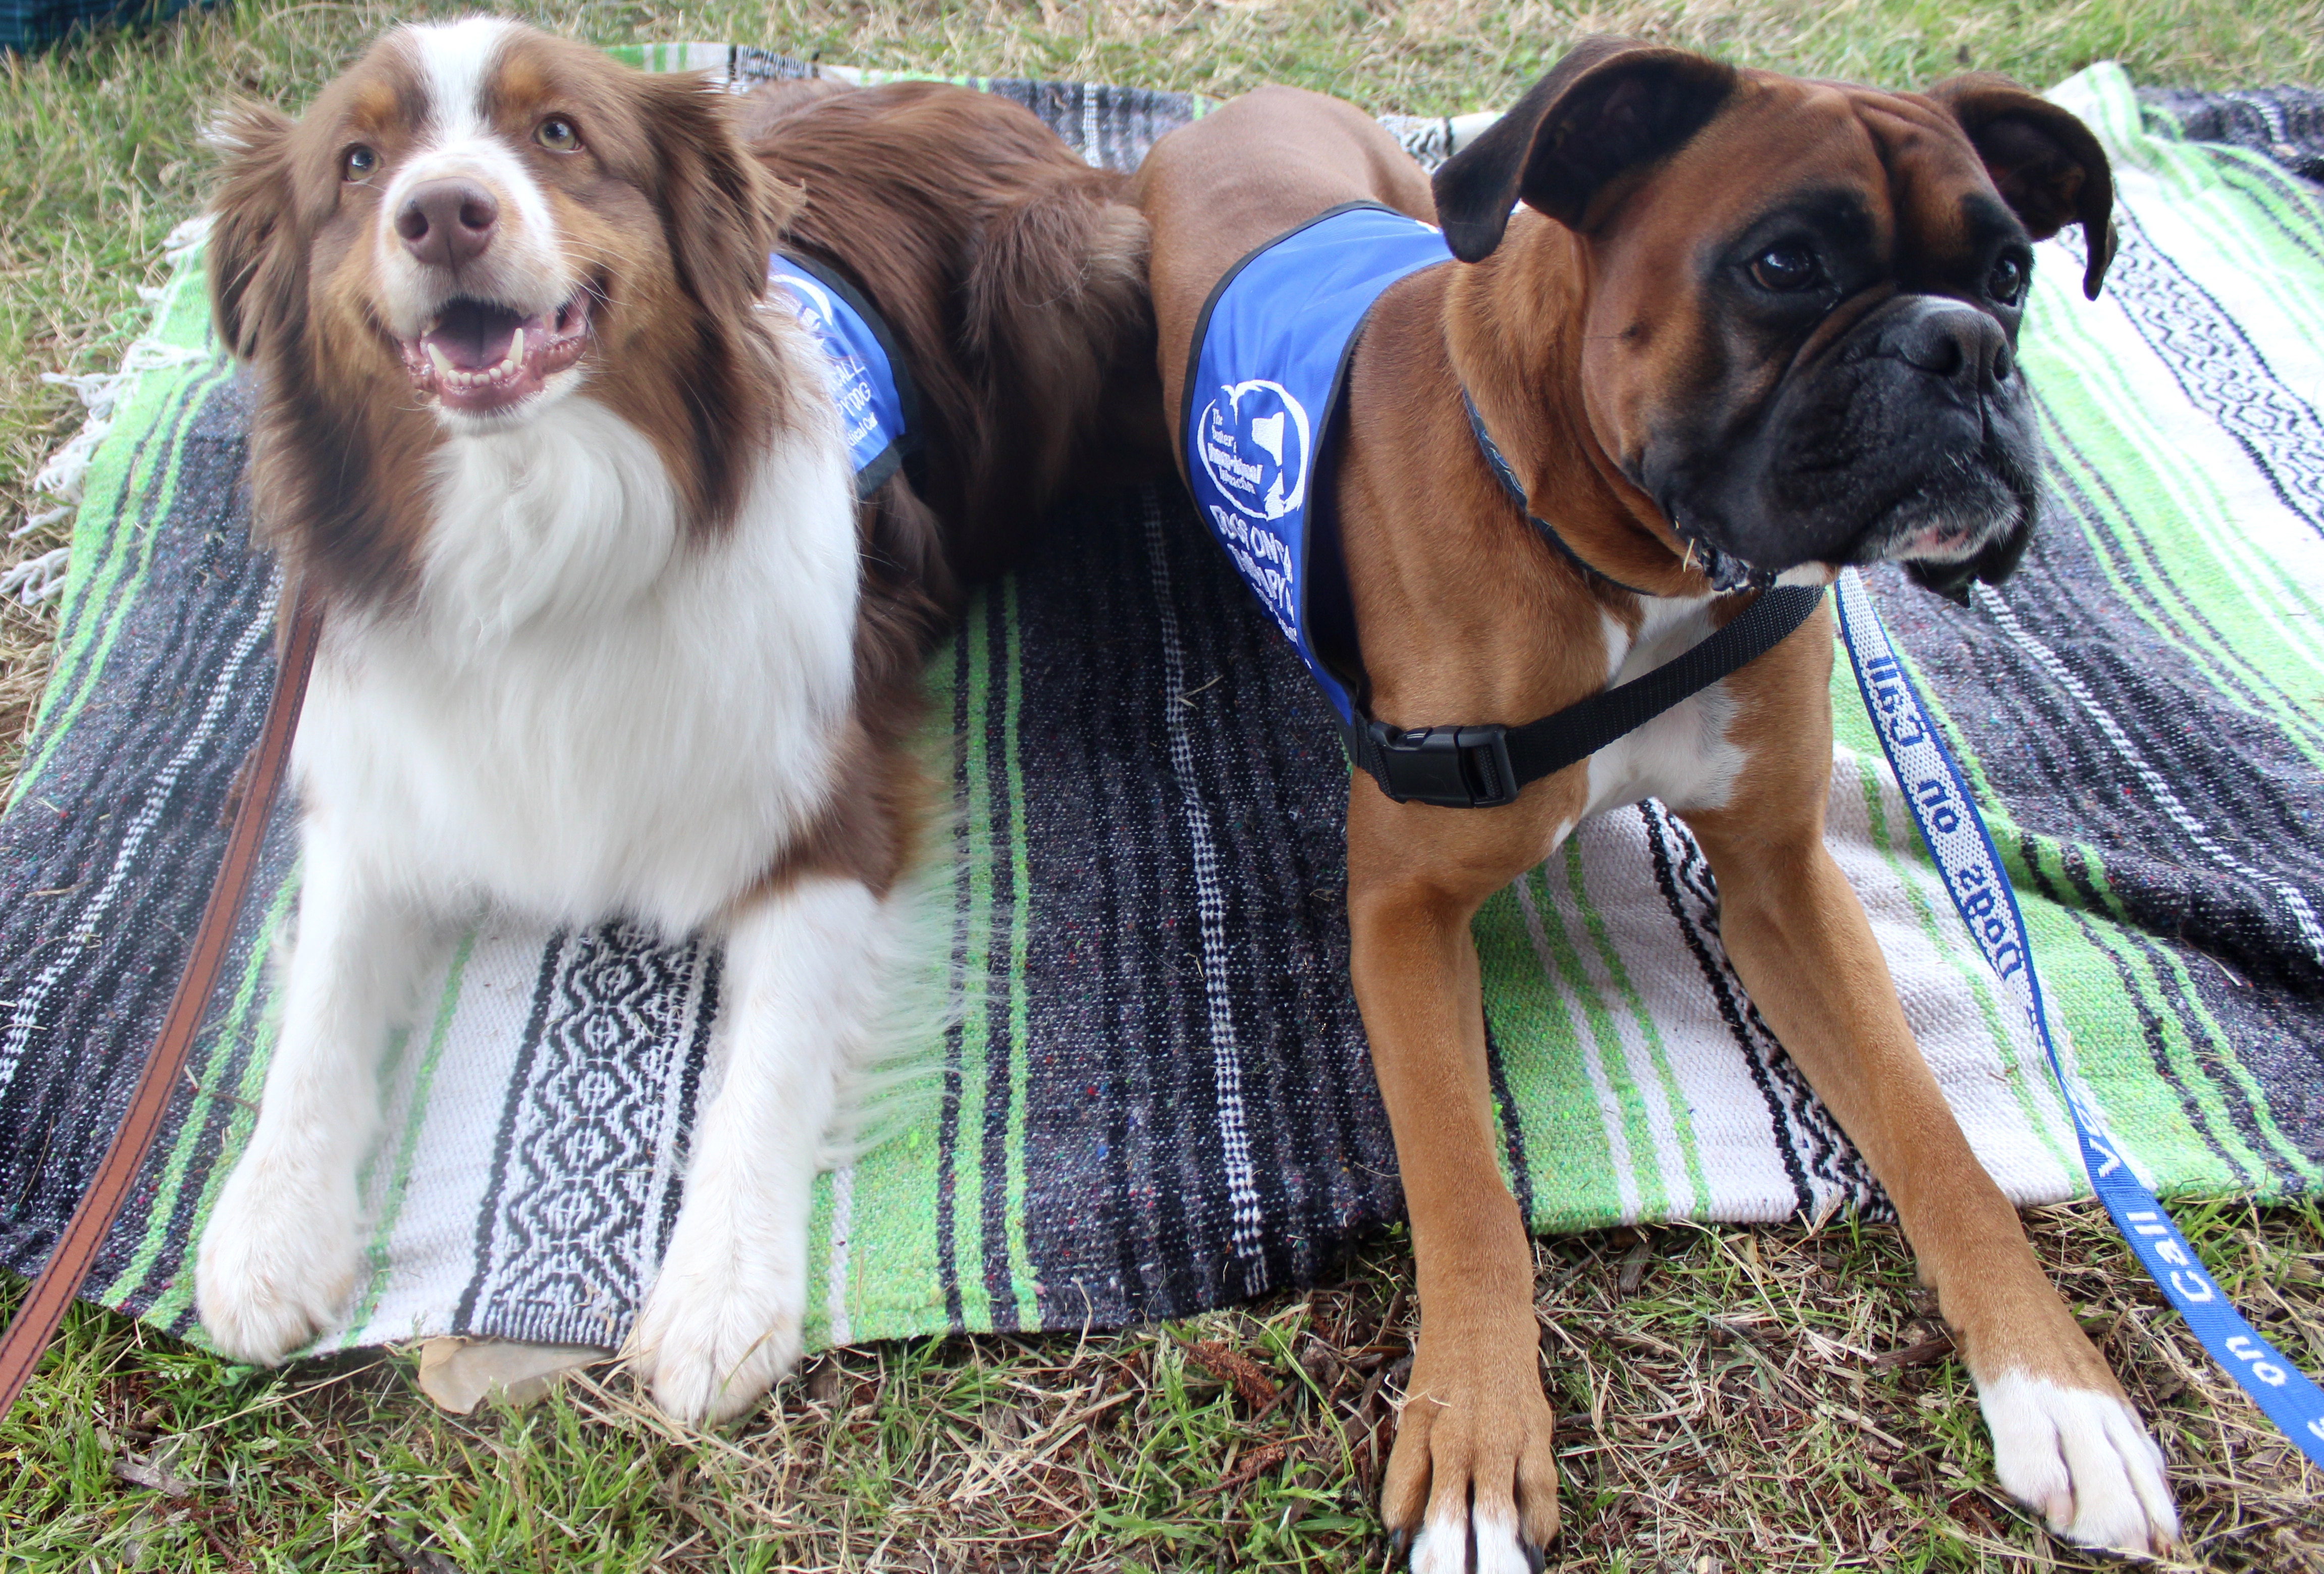 Dogs On Call therapy dogs Rebel, a boxer, and Chewie, an Australian shepherd, pose together on a blanket on the grass of Maymont's Children's Farm for the Grand Reopening.